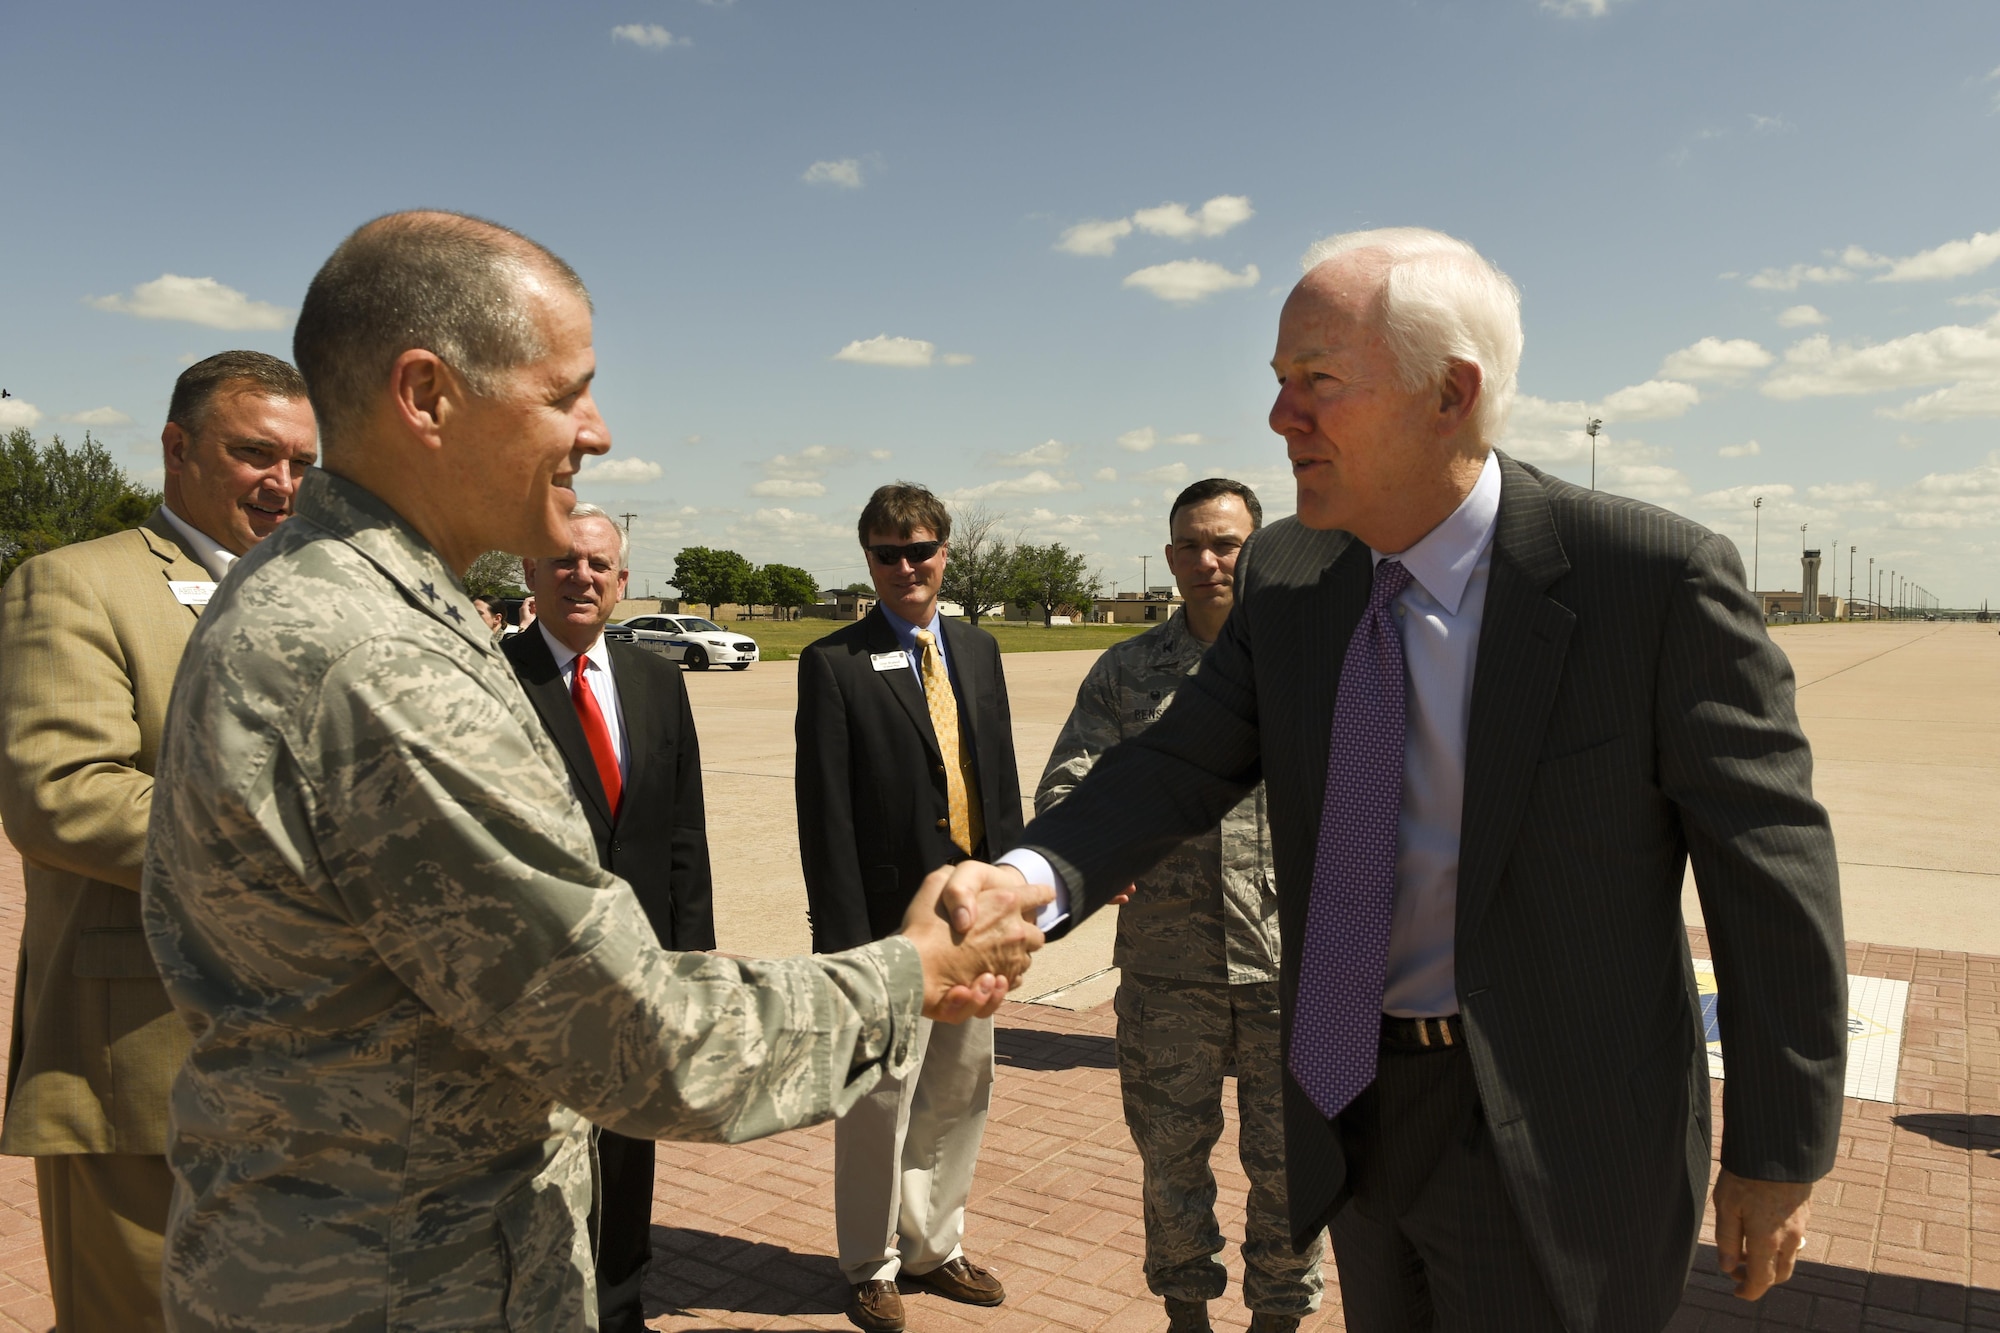 U.S. Sen. John Cornyn, R-TX, shakes hands with Maj. Gen. Thomas Bussiere, 8th Air Force commander, at Dyess Air Force Base, April 18, 2017. The purpose of the visit was to familiarize the senator with the base and its mission sets, get a glimpse at a day in the life of Team Dyess Airmen and meet with Abilene community leaders. (U.S. Air Force photo by Senior Airman Kedesha Pennant)